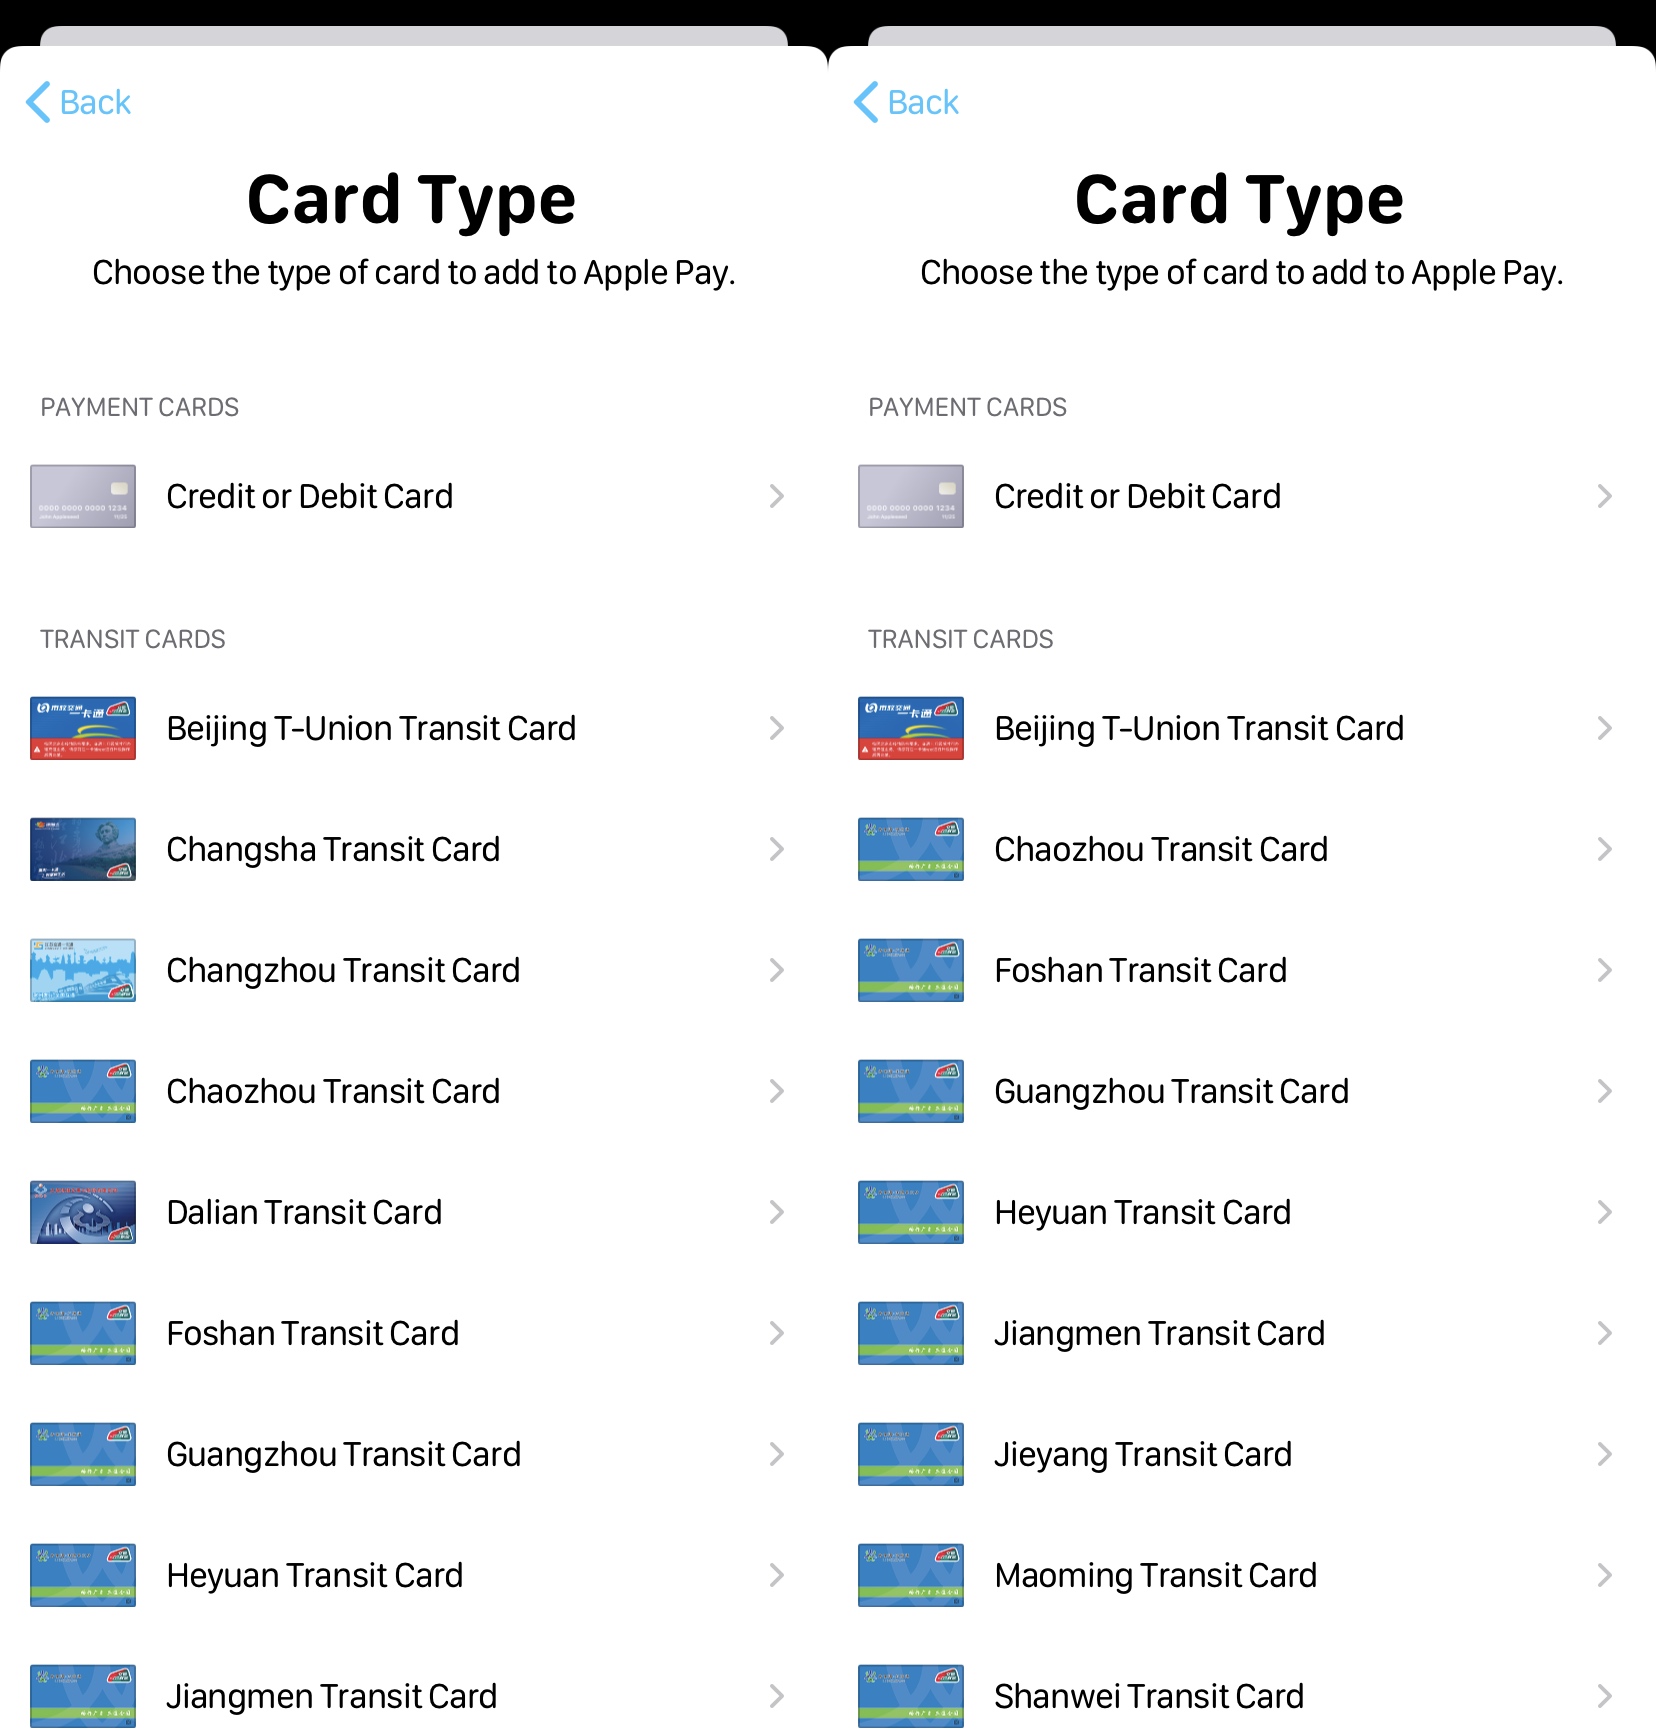 This free jailbreak tweak lets jailbreakers add unsupported cards to the Wallet app